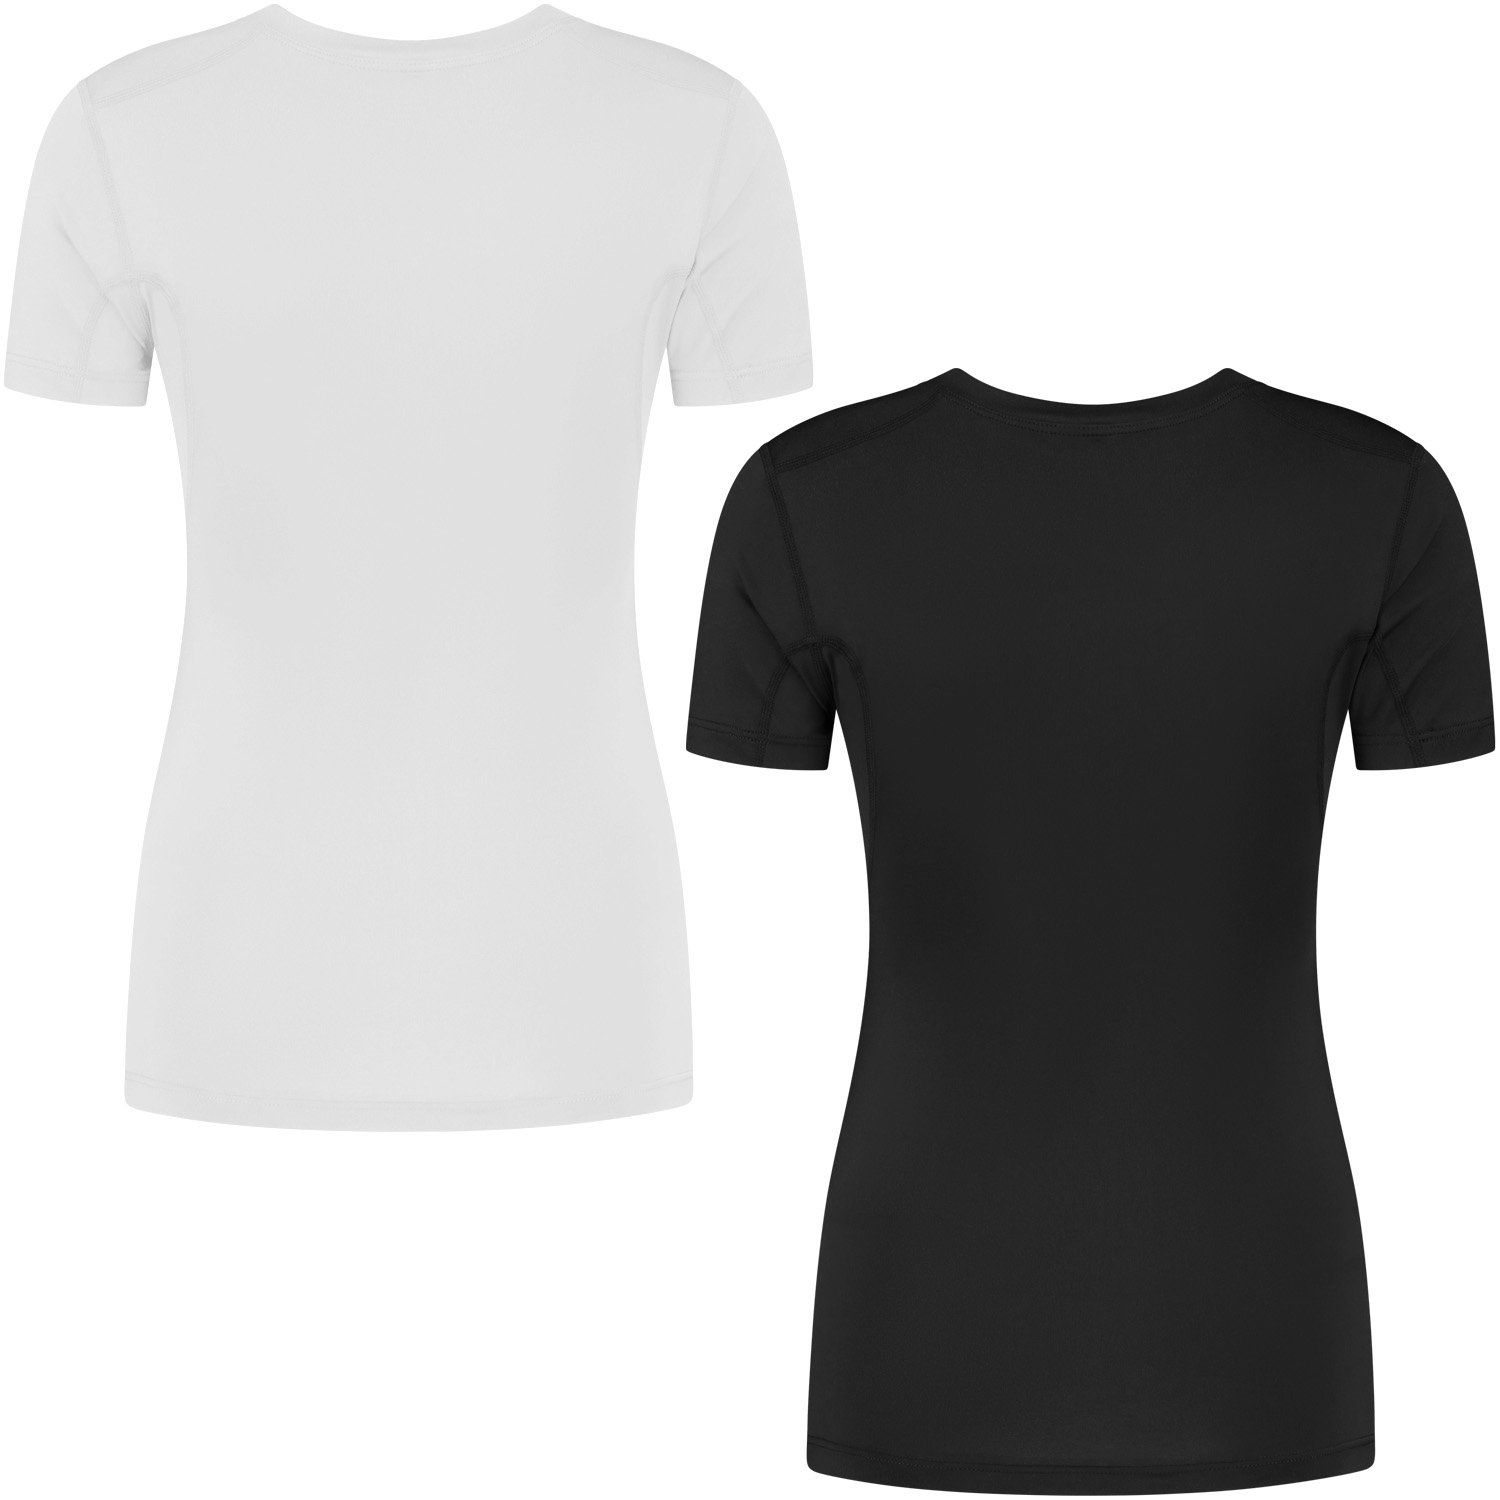 gladiator sports thermal shirt for women in black and white back view